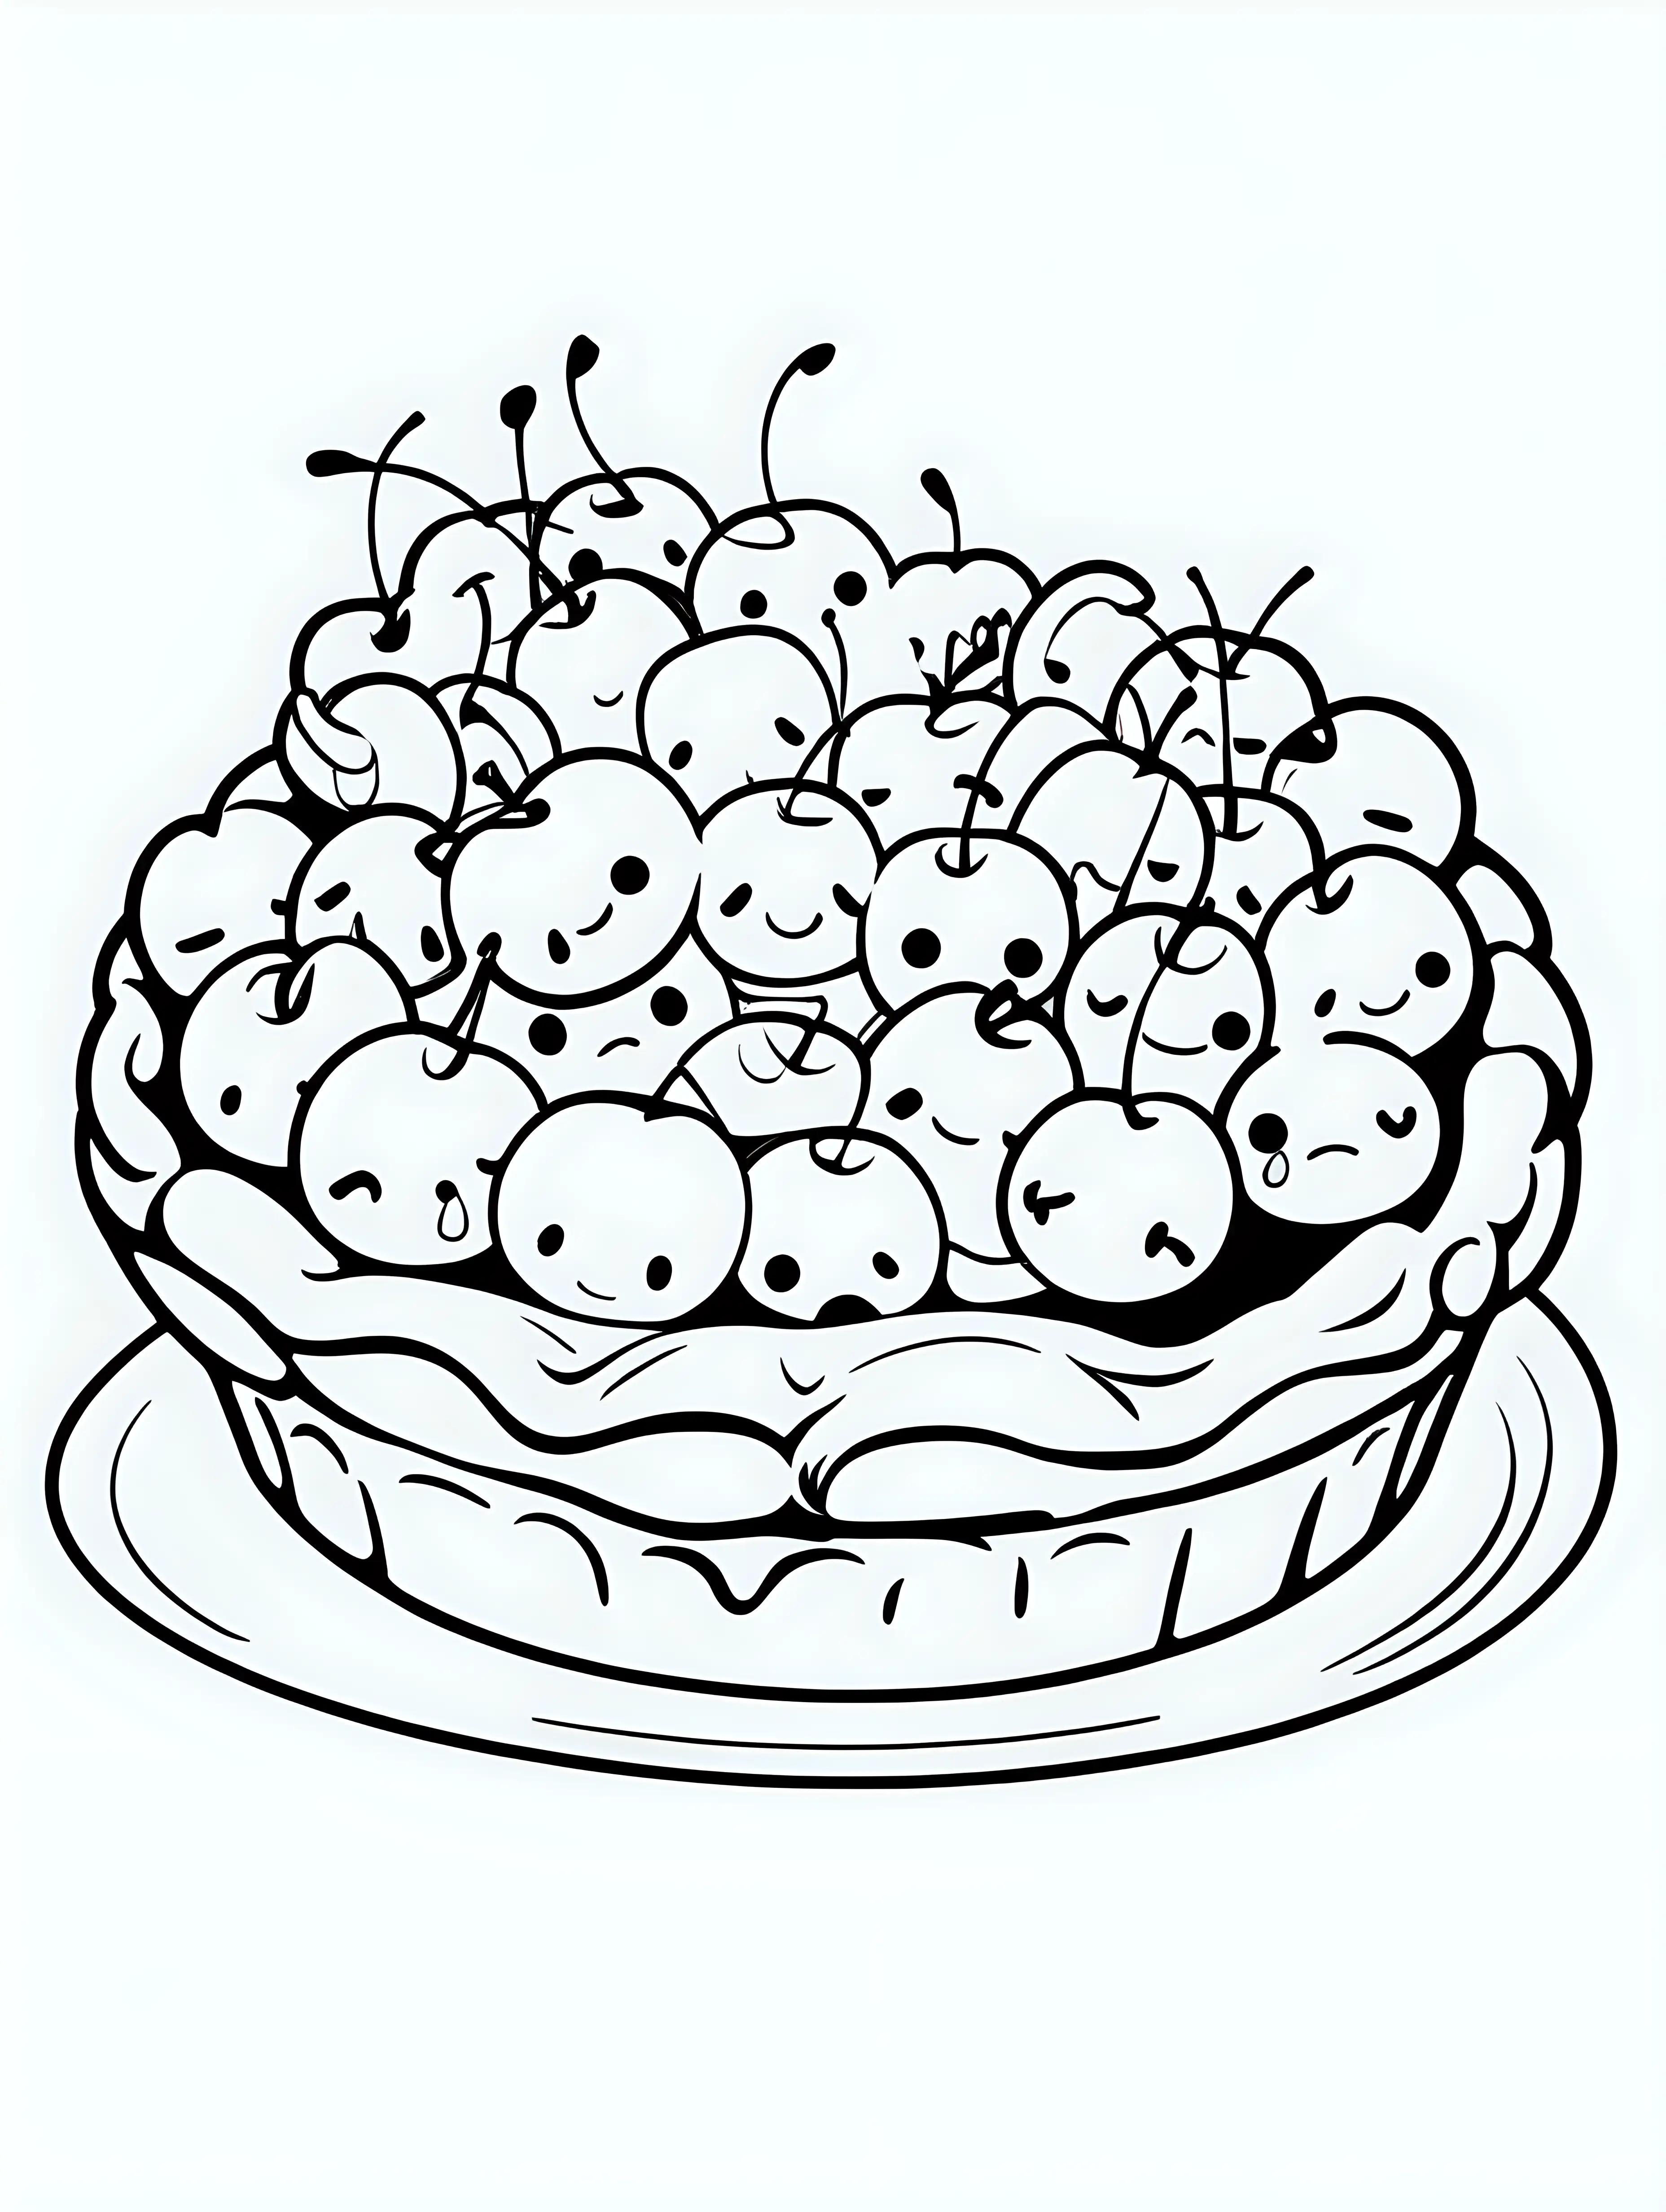 coloring book, cartoon drawing, clean black and white, single line, white background, cute large cherry pie, emojis